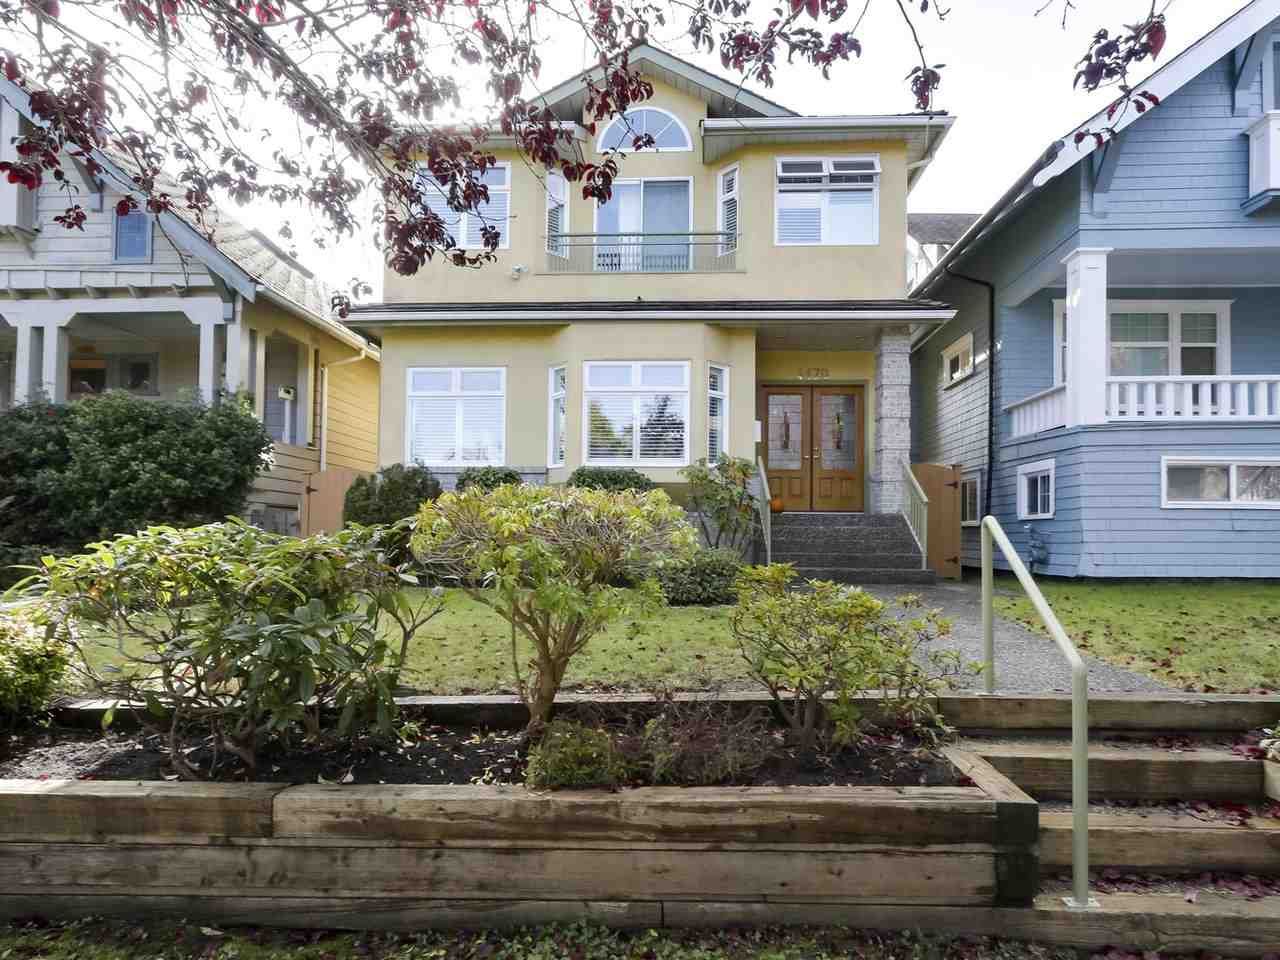 We have sold a property at 4470 12TH AVE W in Vancouver